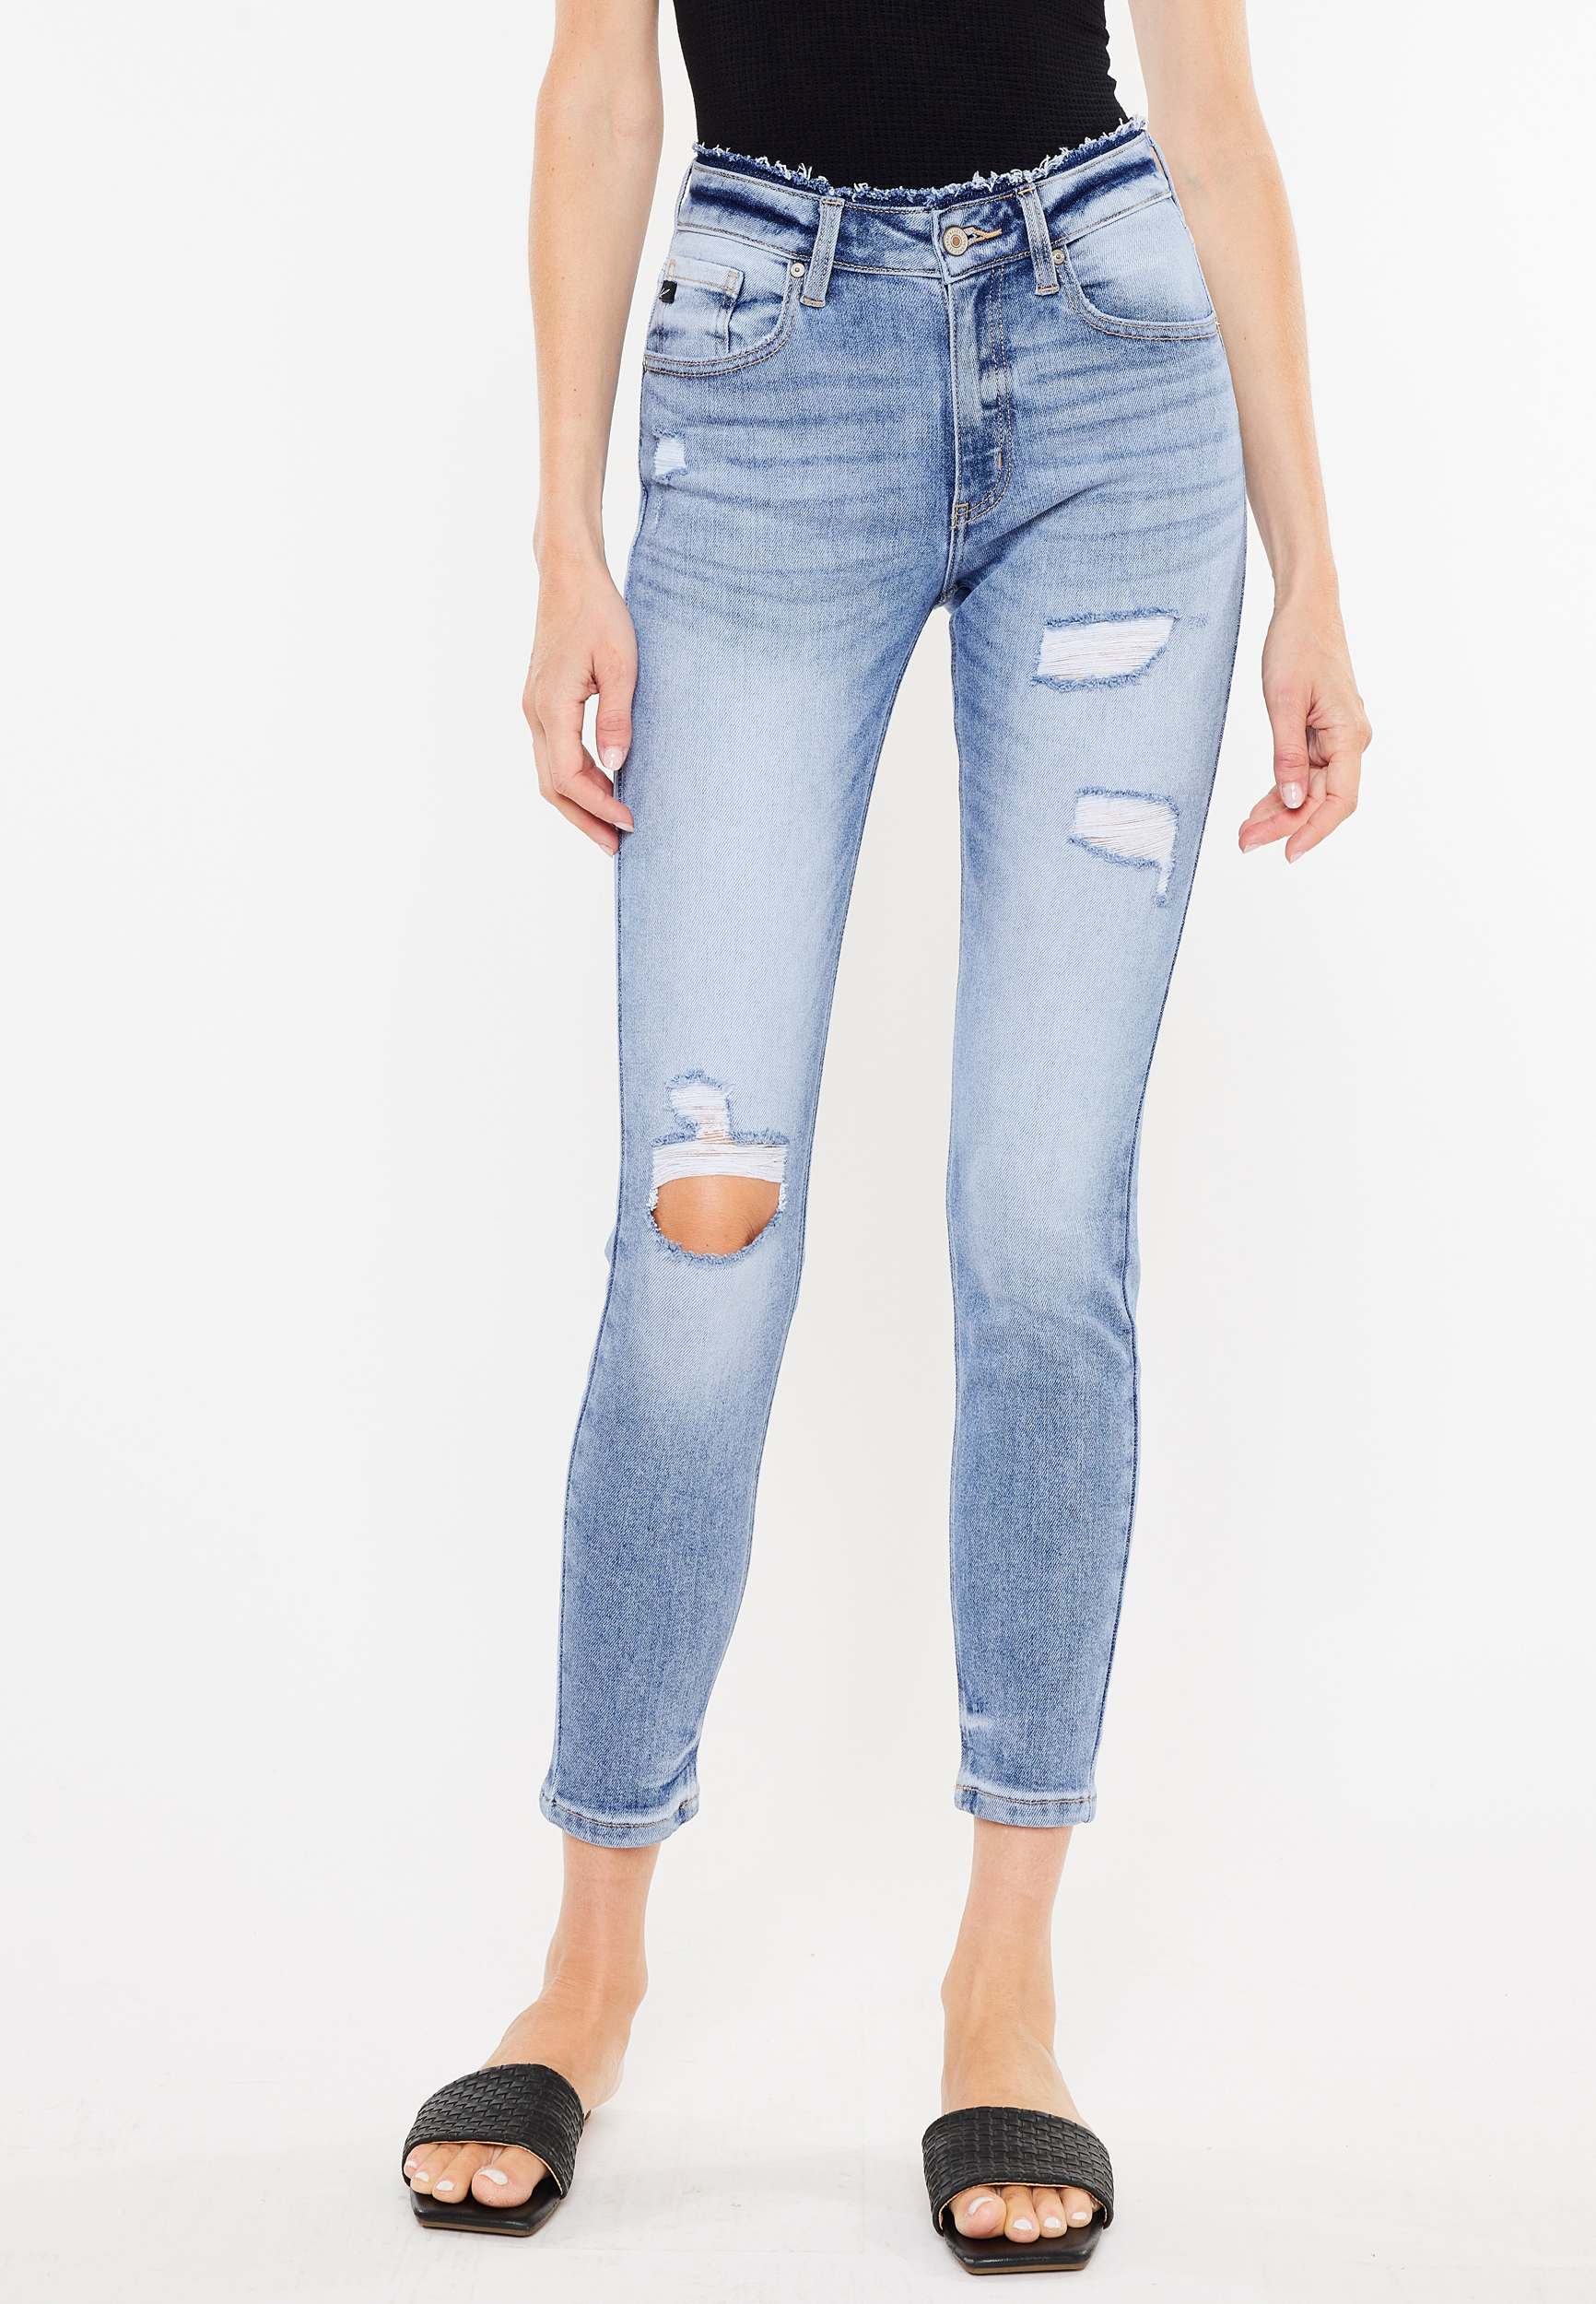 KanCan™ Skinny High Rise Ripped Jean | maurices